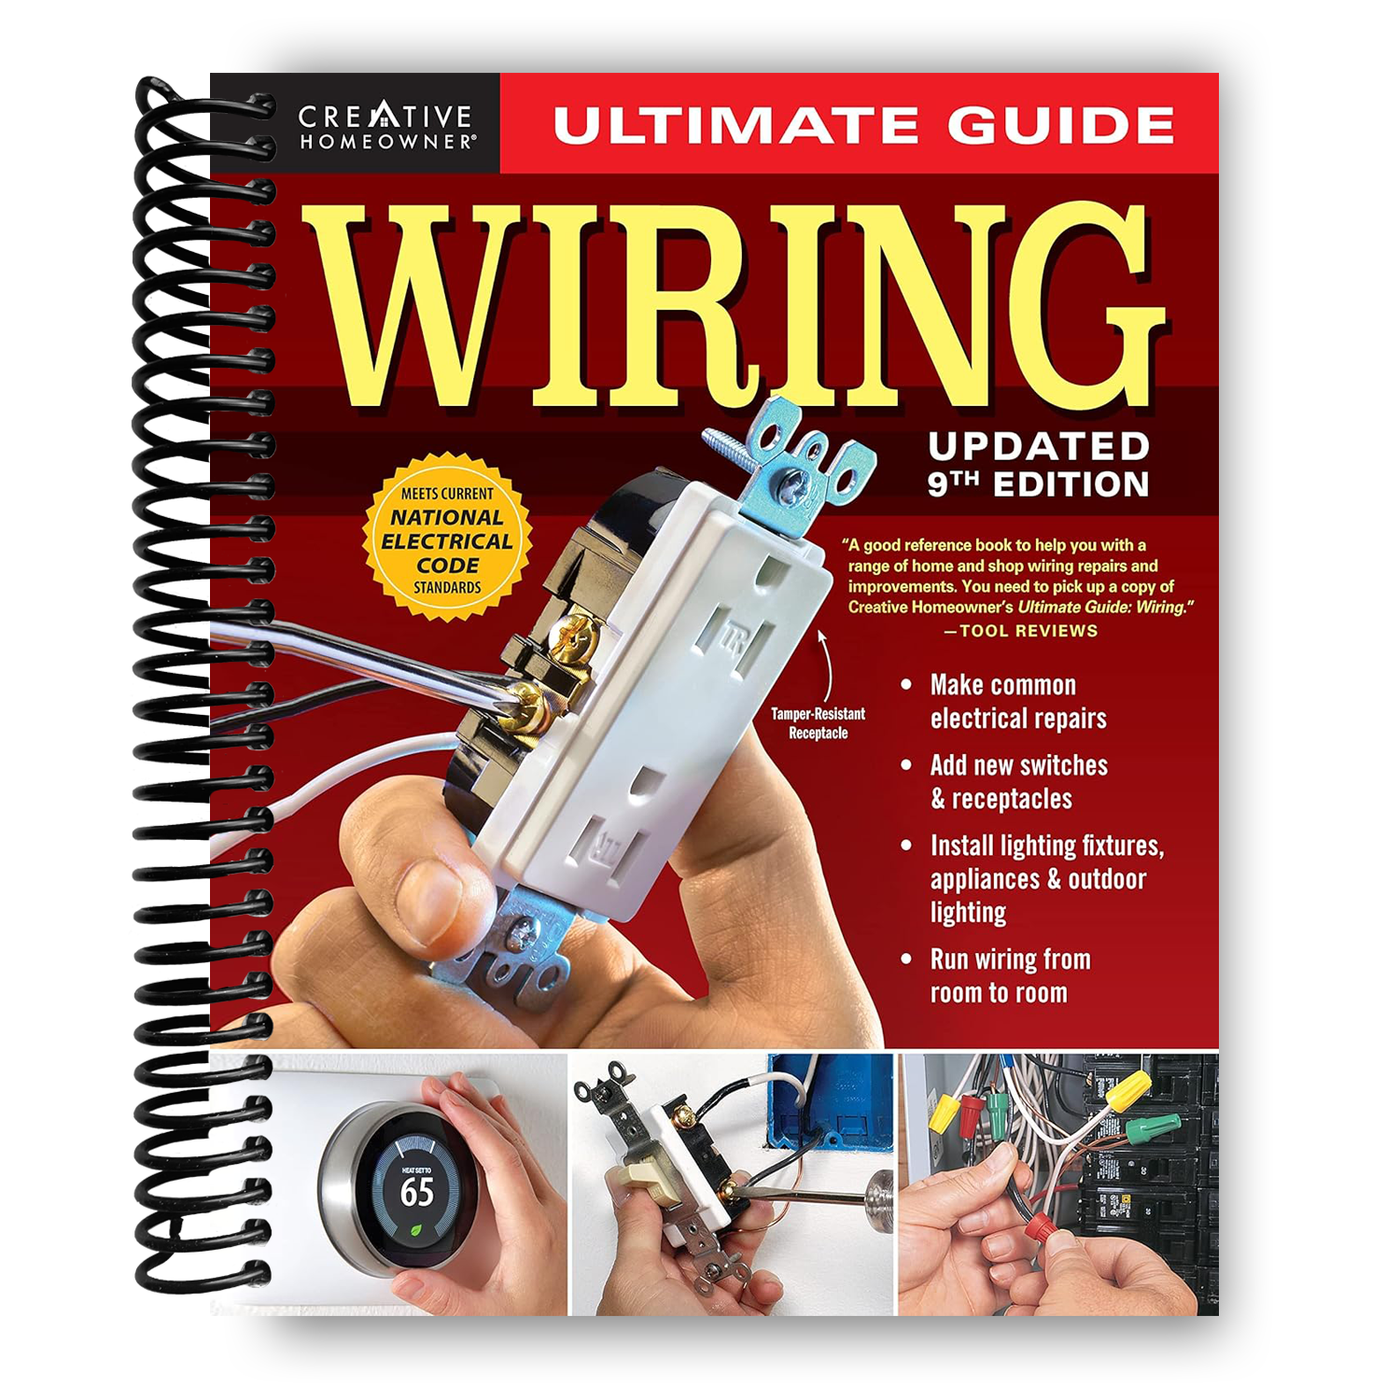 Ultimate Guide: Wiring, 9th Updated Edition (Spiral Bound)